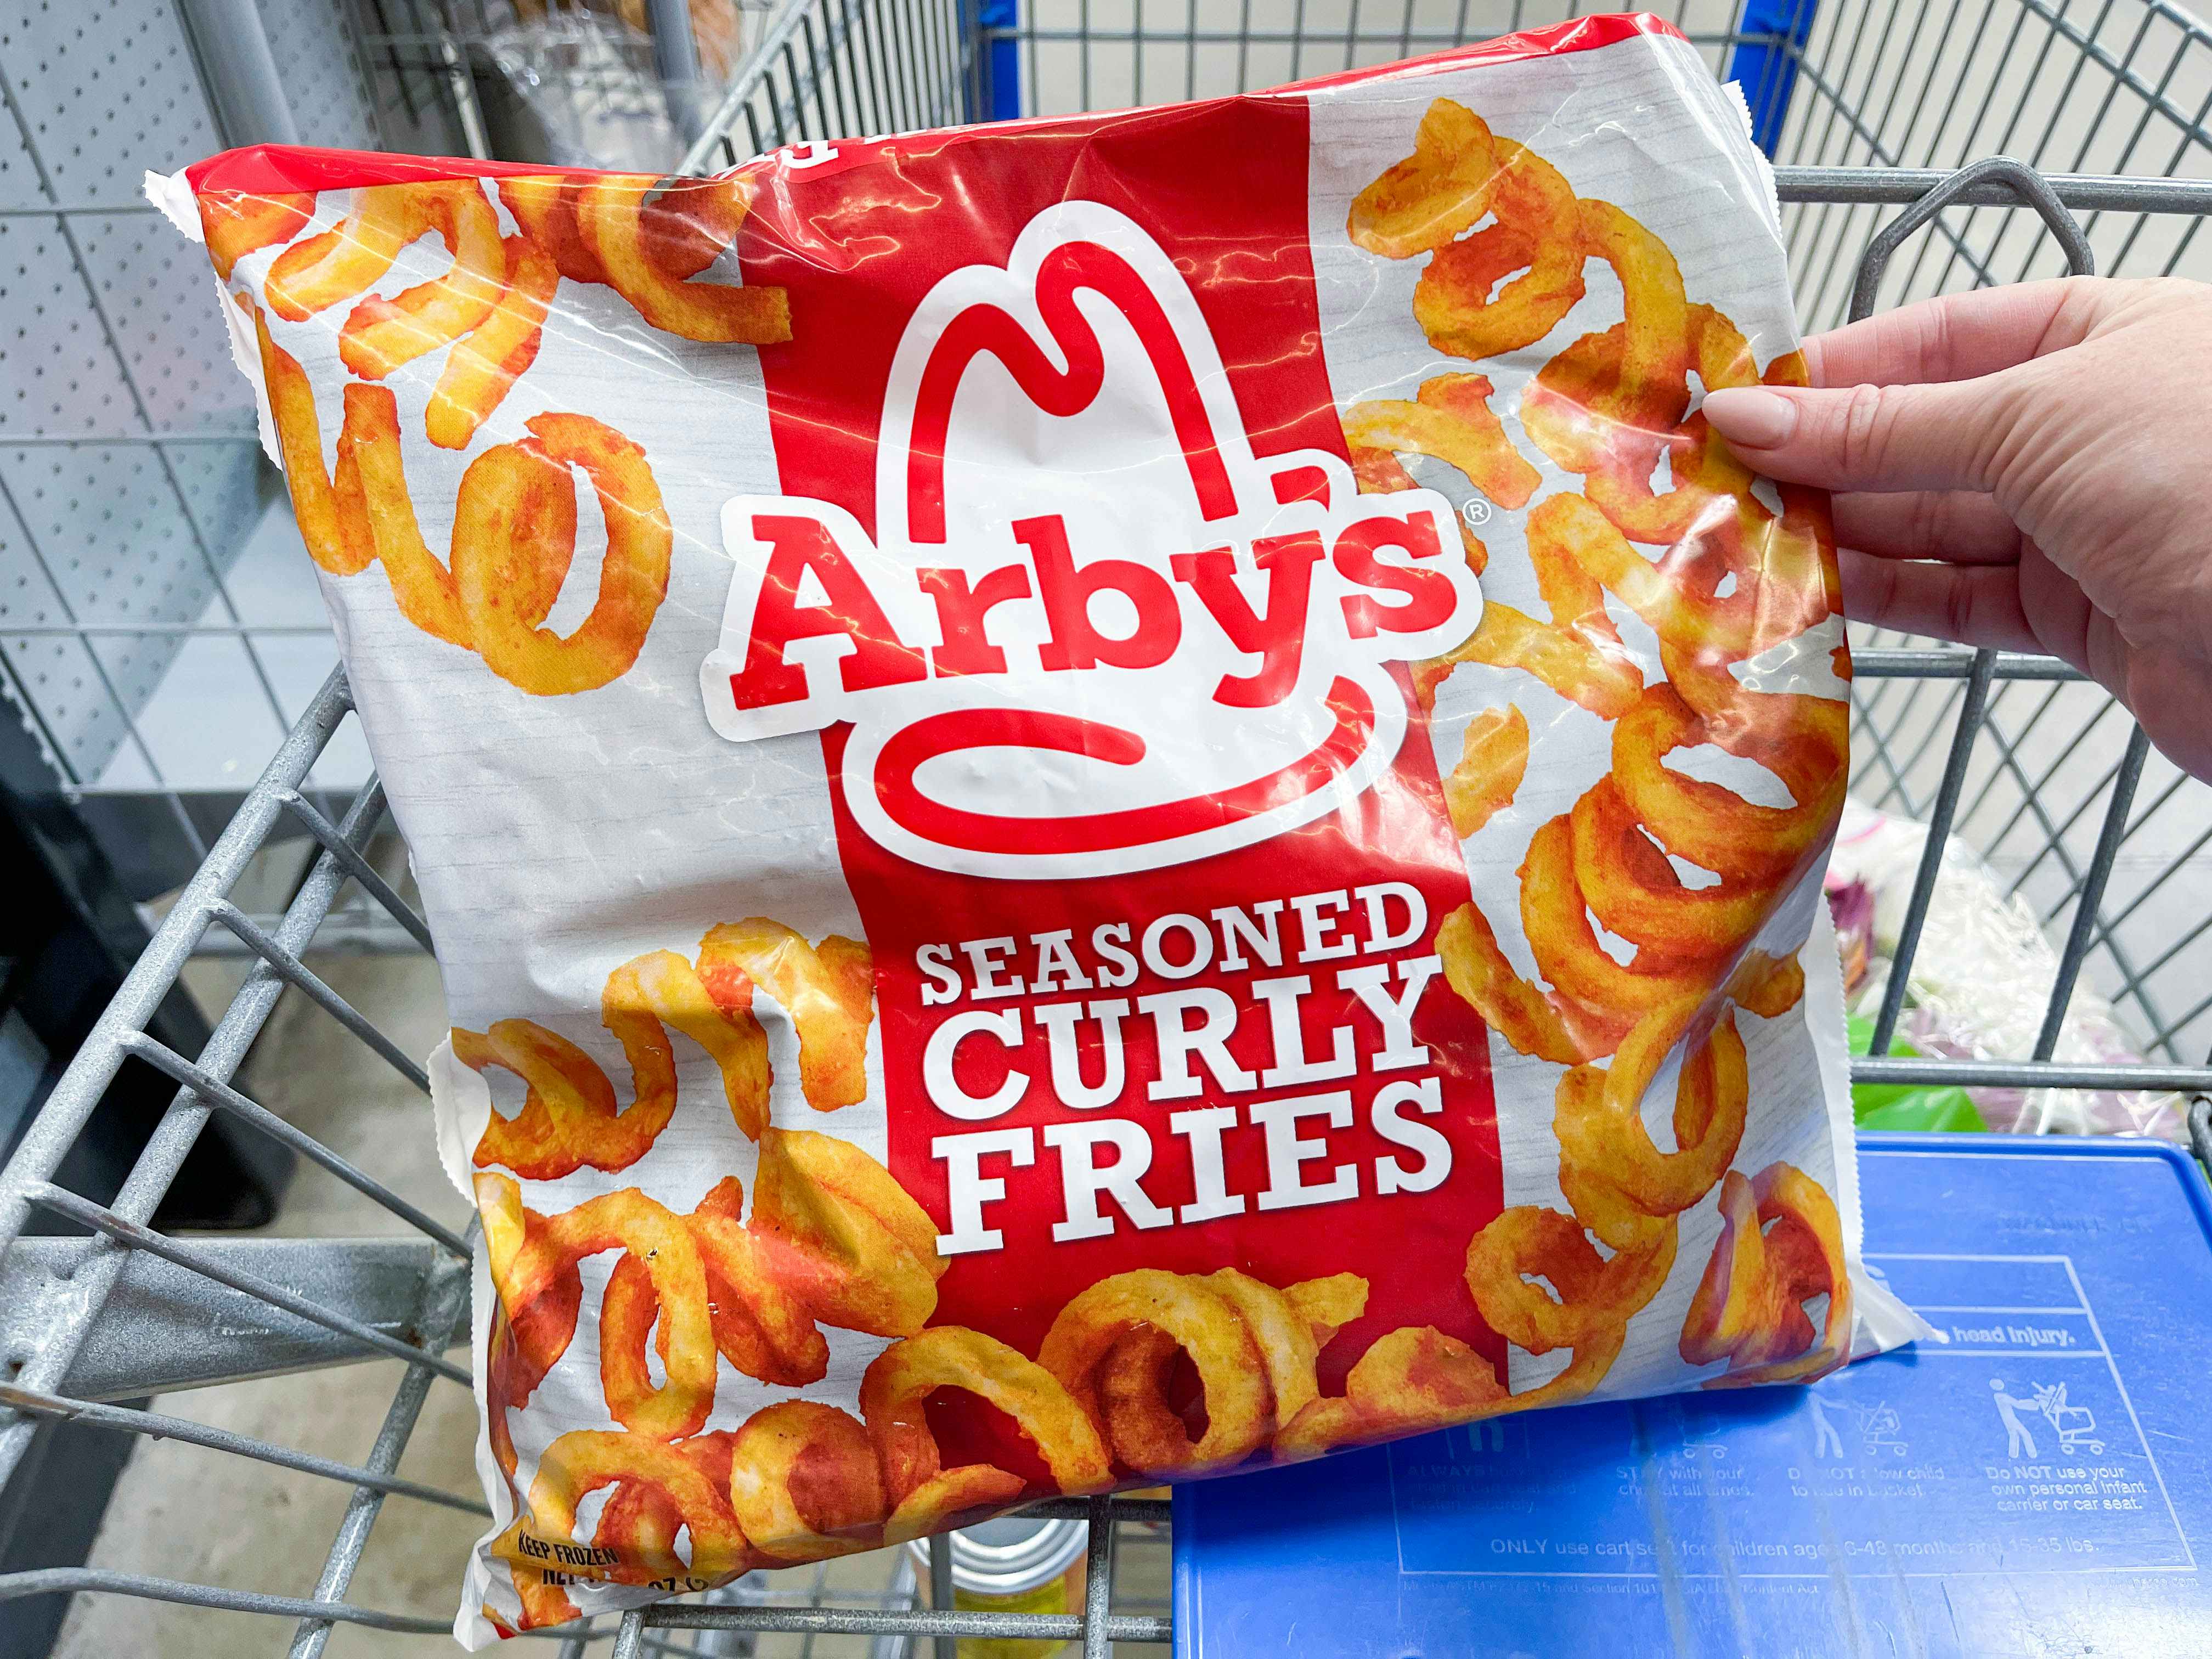 https://prod-cdn-thekrazycouponlady.imgix.net/wp-content/uploads/2022/06/arbys-deals-tips-curly-fries-frozen-2022-4-1655967737-1655967737.jpg?auto=format&fit=fill&q=25